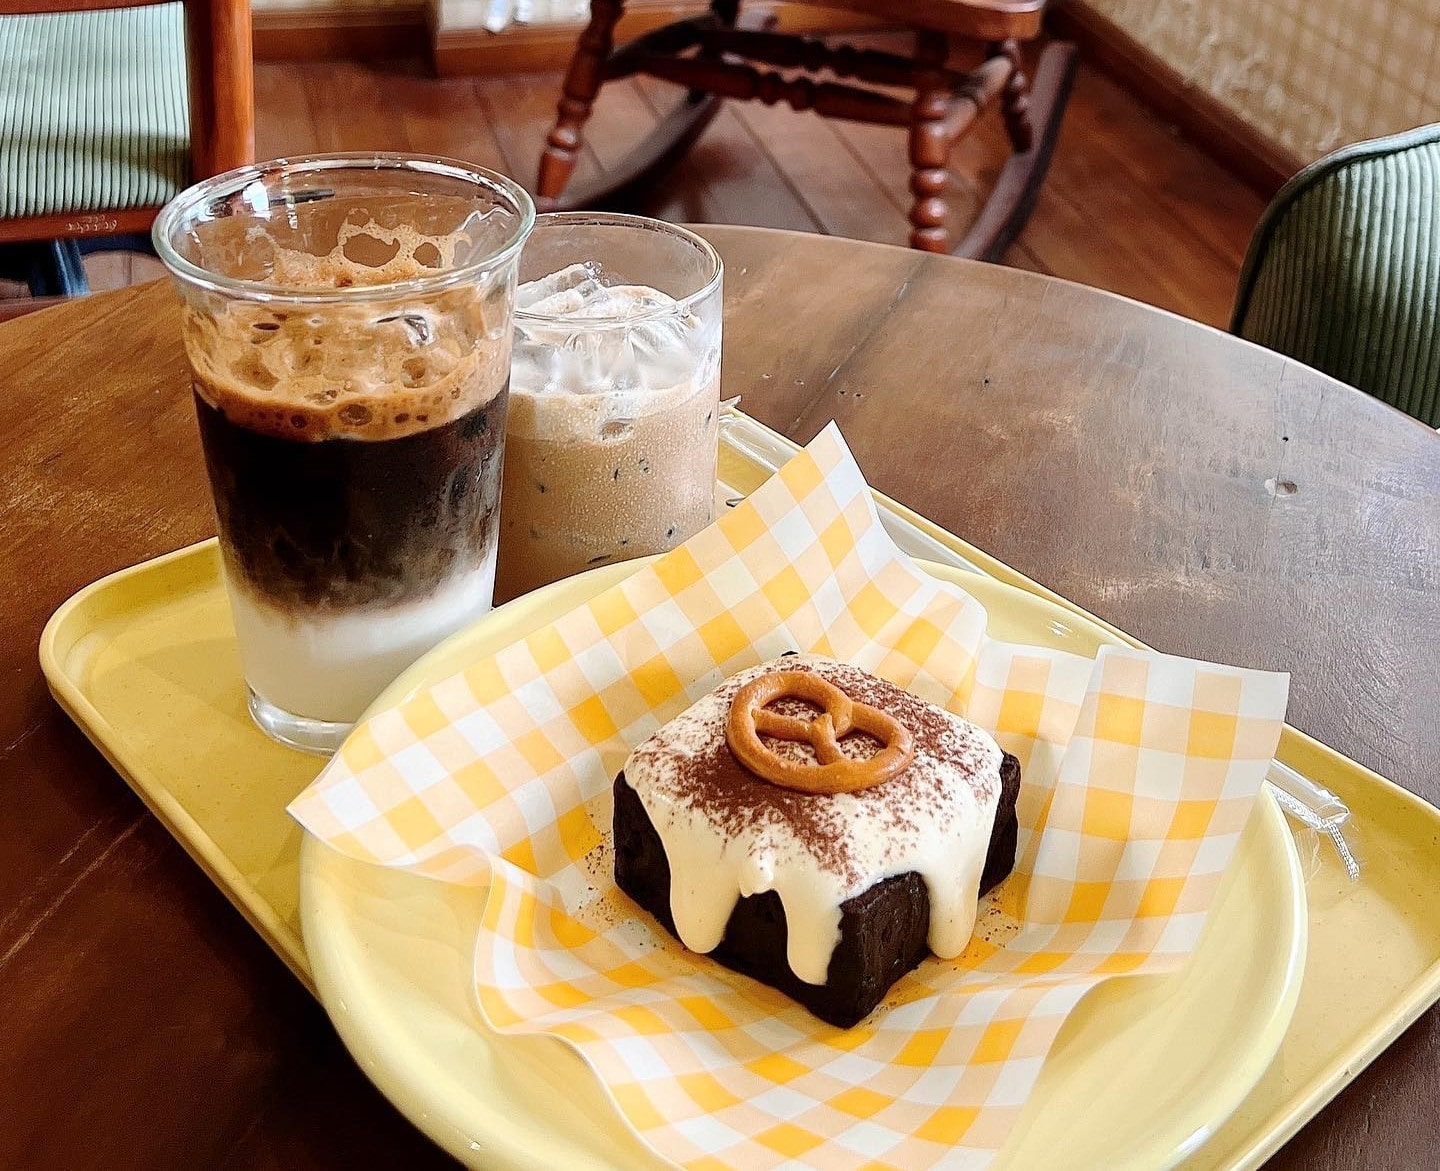 Cafe Camy Mr Bean-Inspired Homestay - Camy cafe pastries and coffee